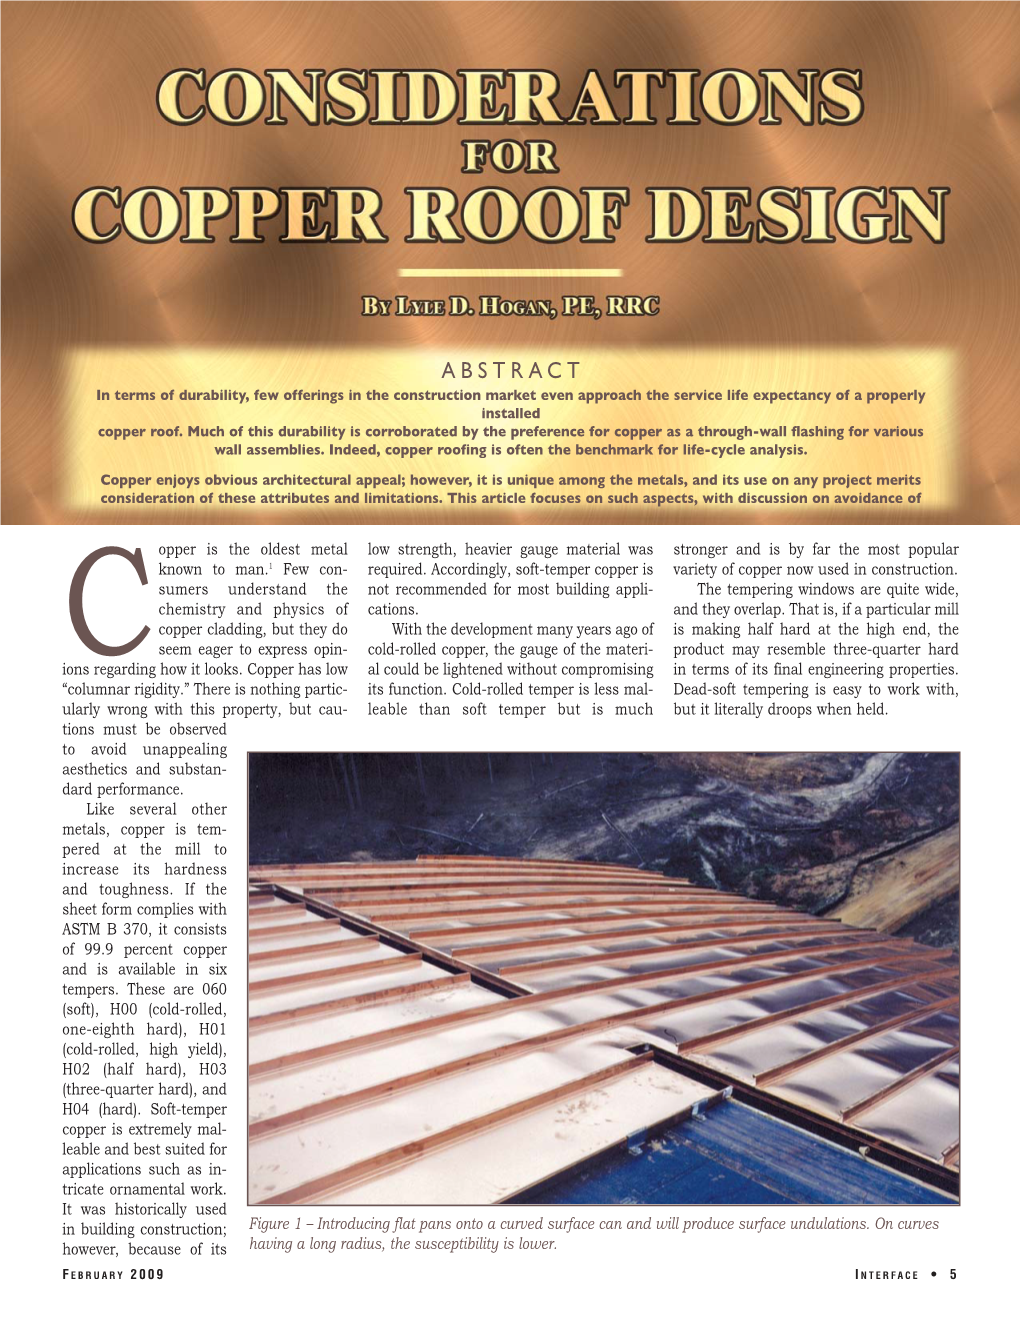 Considerations for Copper Roof Design